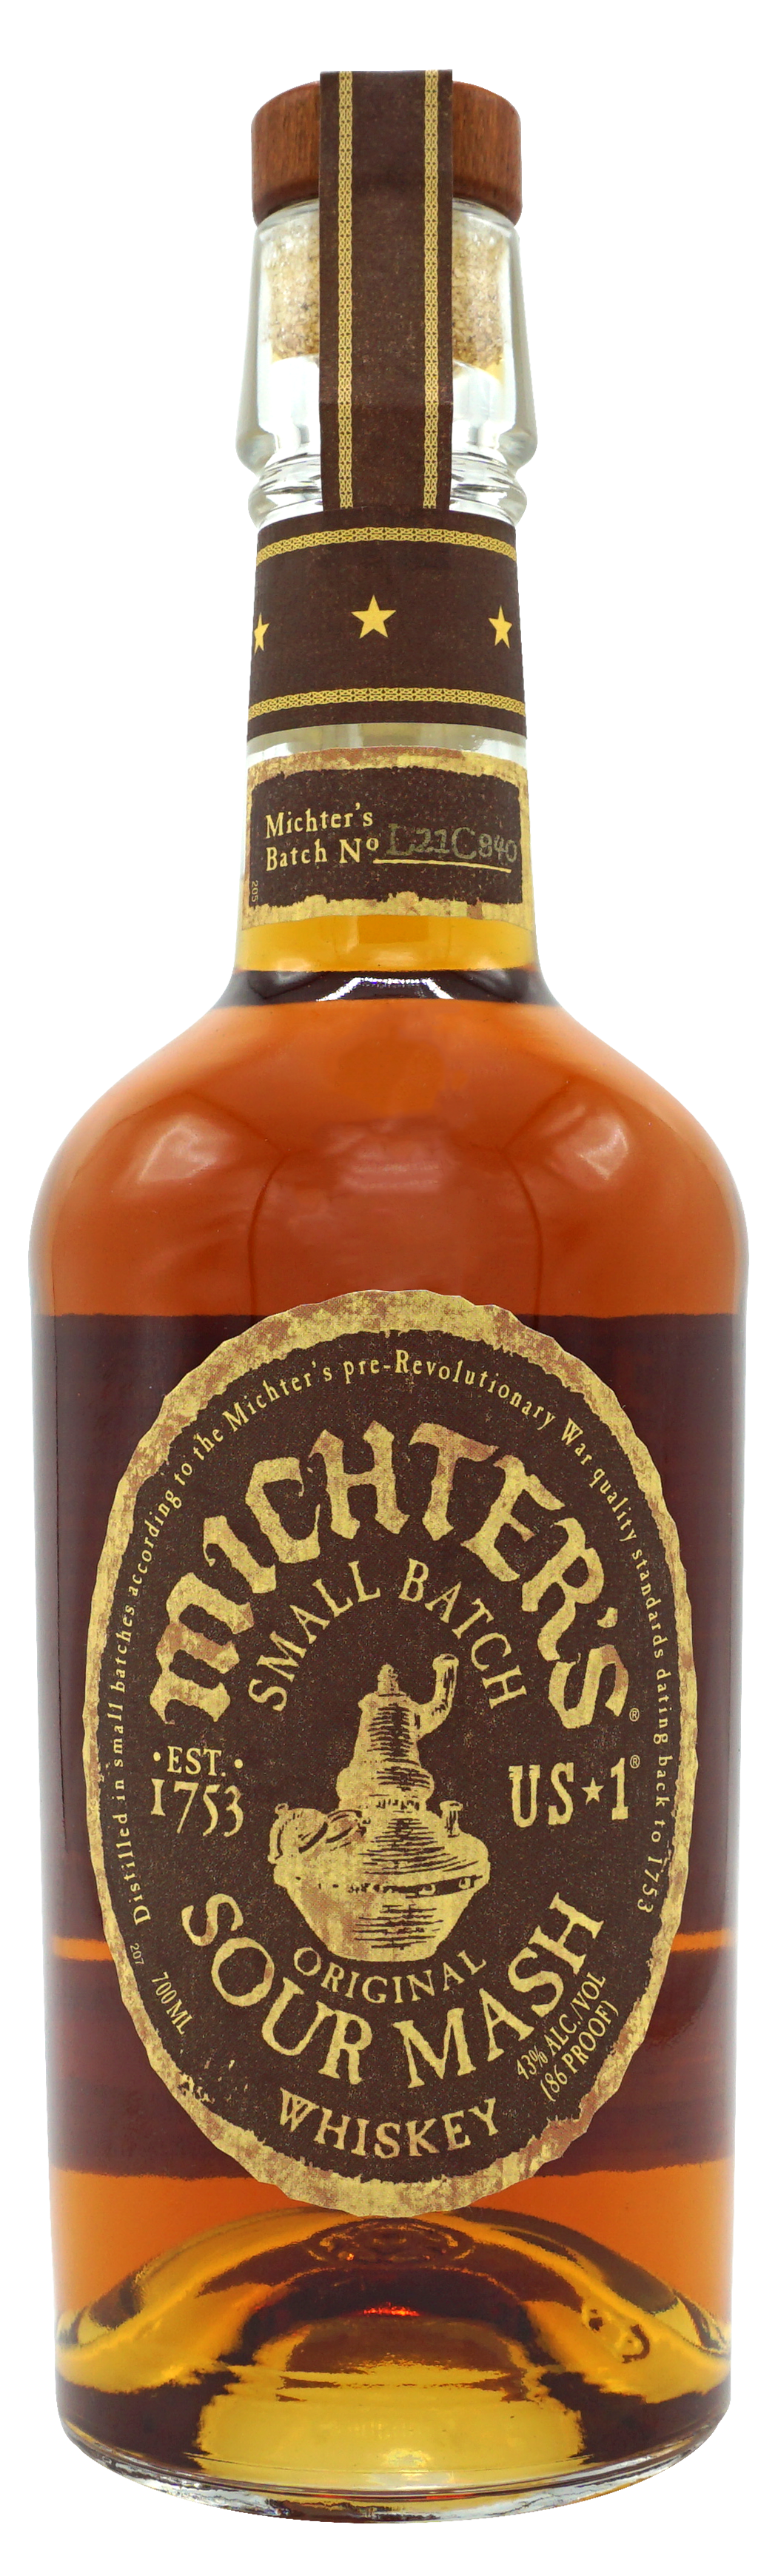 michters-sour-mash-whiskey-43